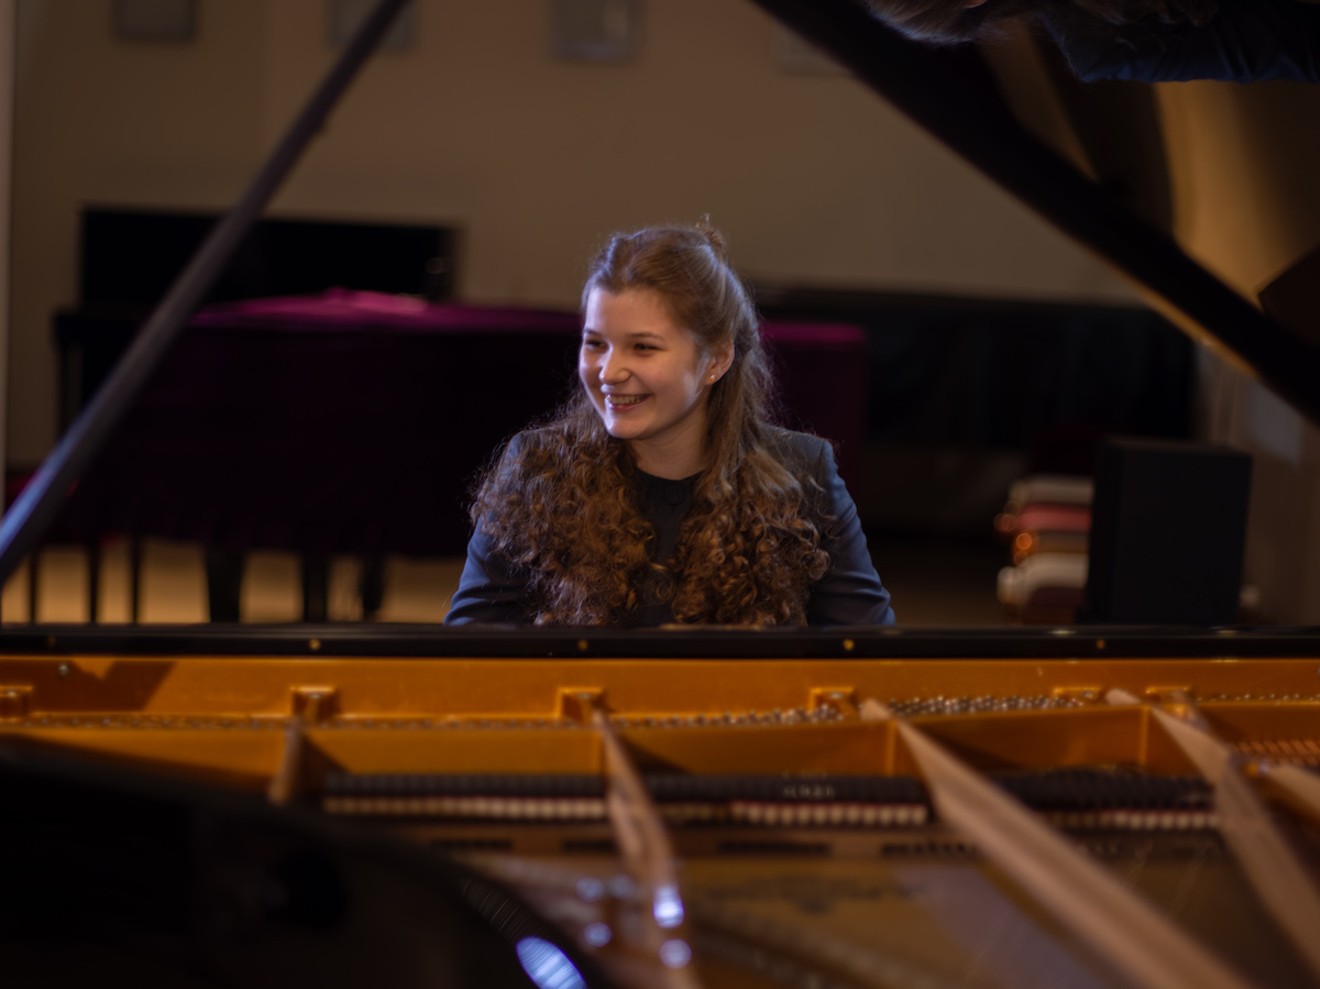 Khrystyna Mykhailichenko, a 16-year-old Ukrainian refugee, will perform in a program of Young Virtuosos.